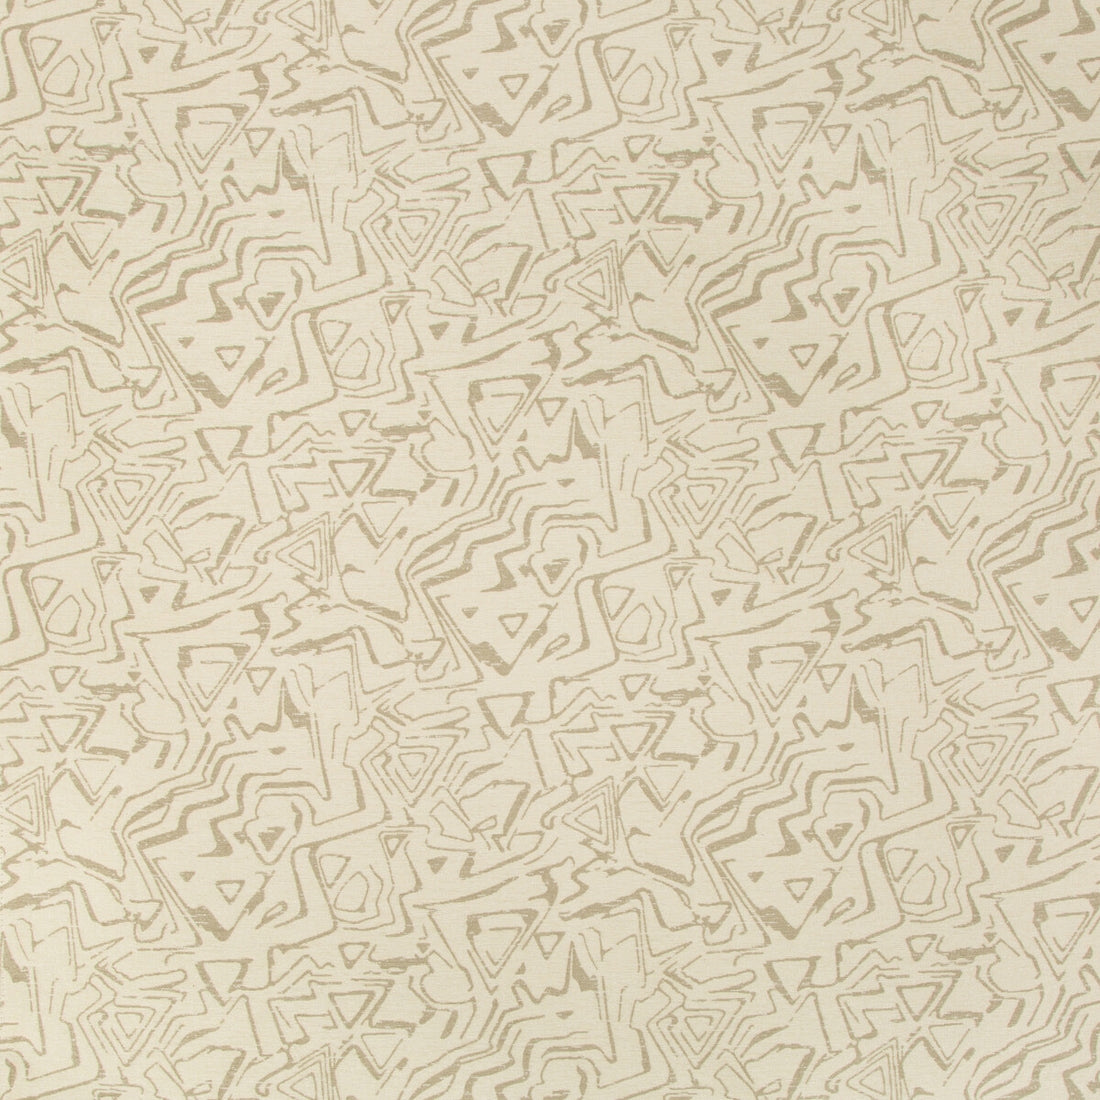 Kravet Design fabric in 34955-16 color - pattern 34955.16.0 - by Kravet Design in the Performance Crypton Home collection